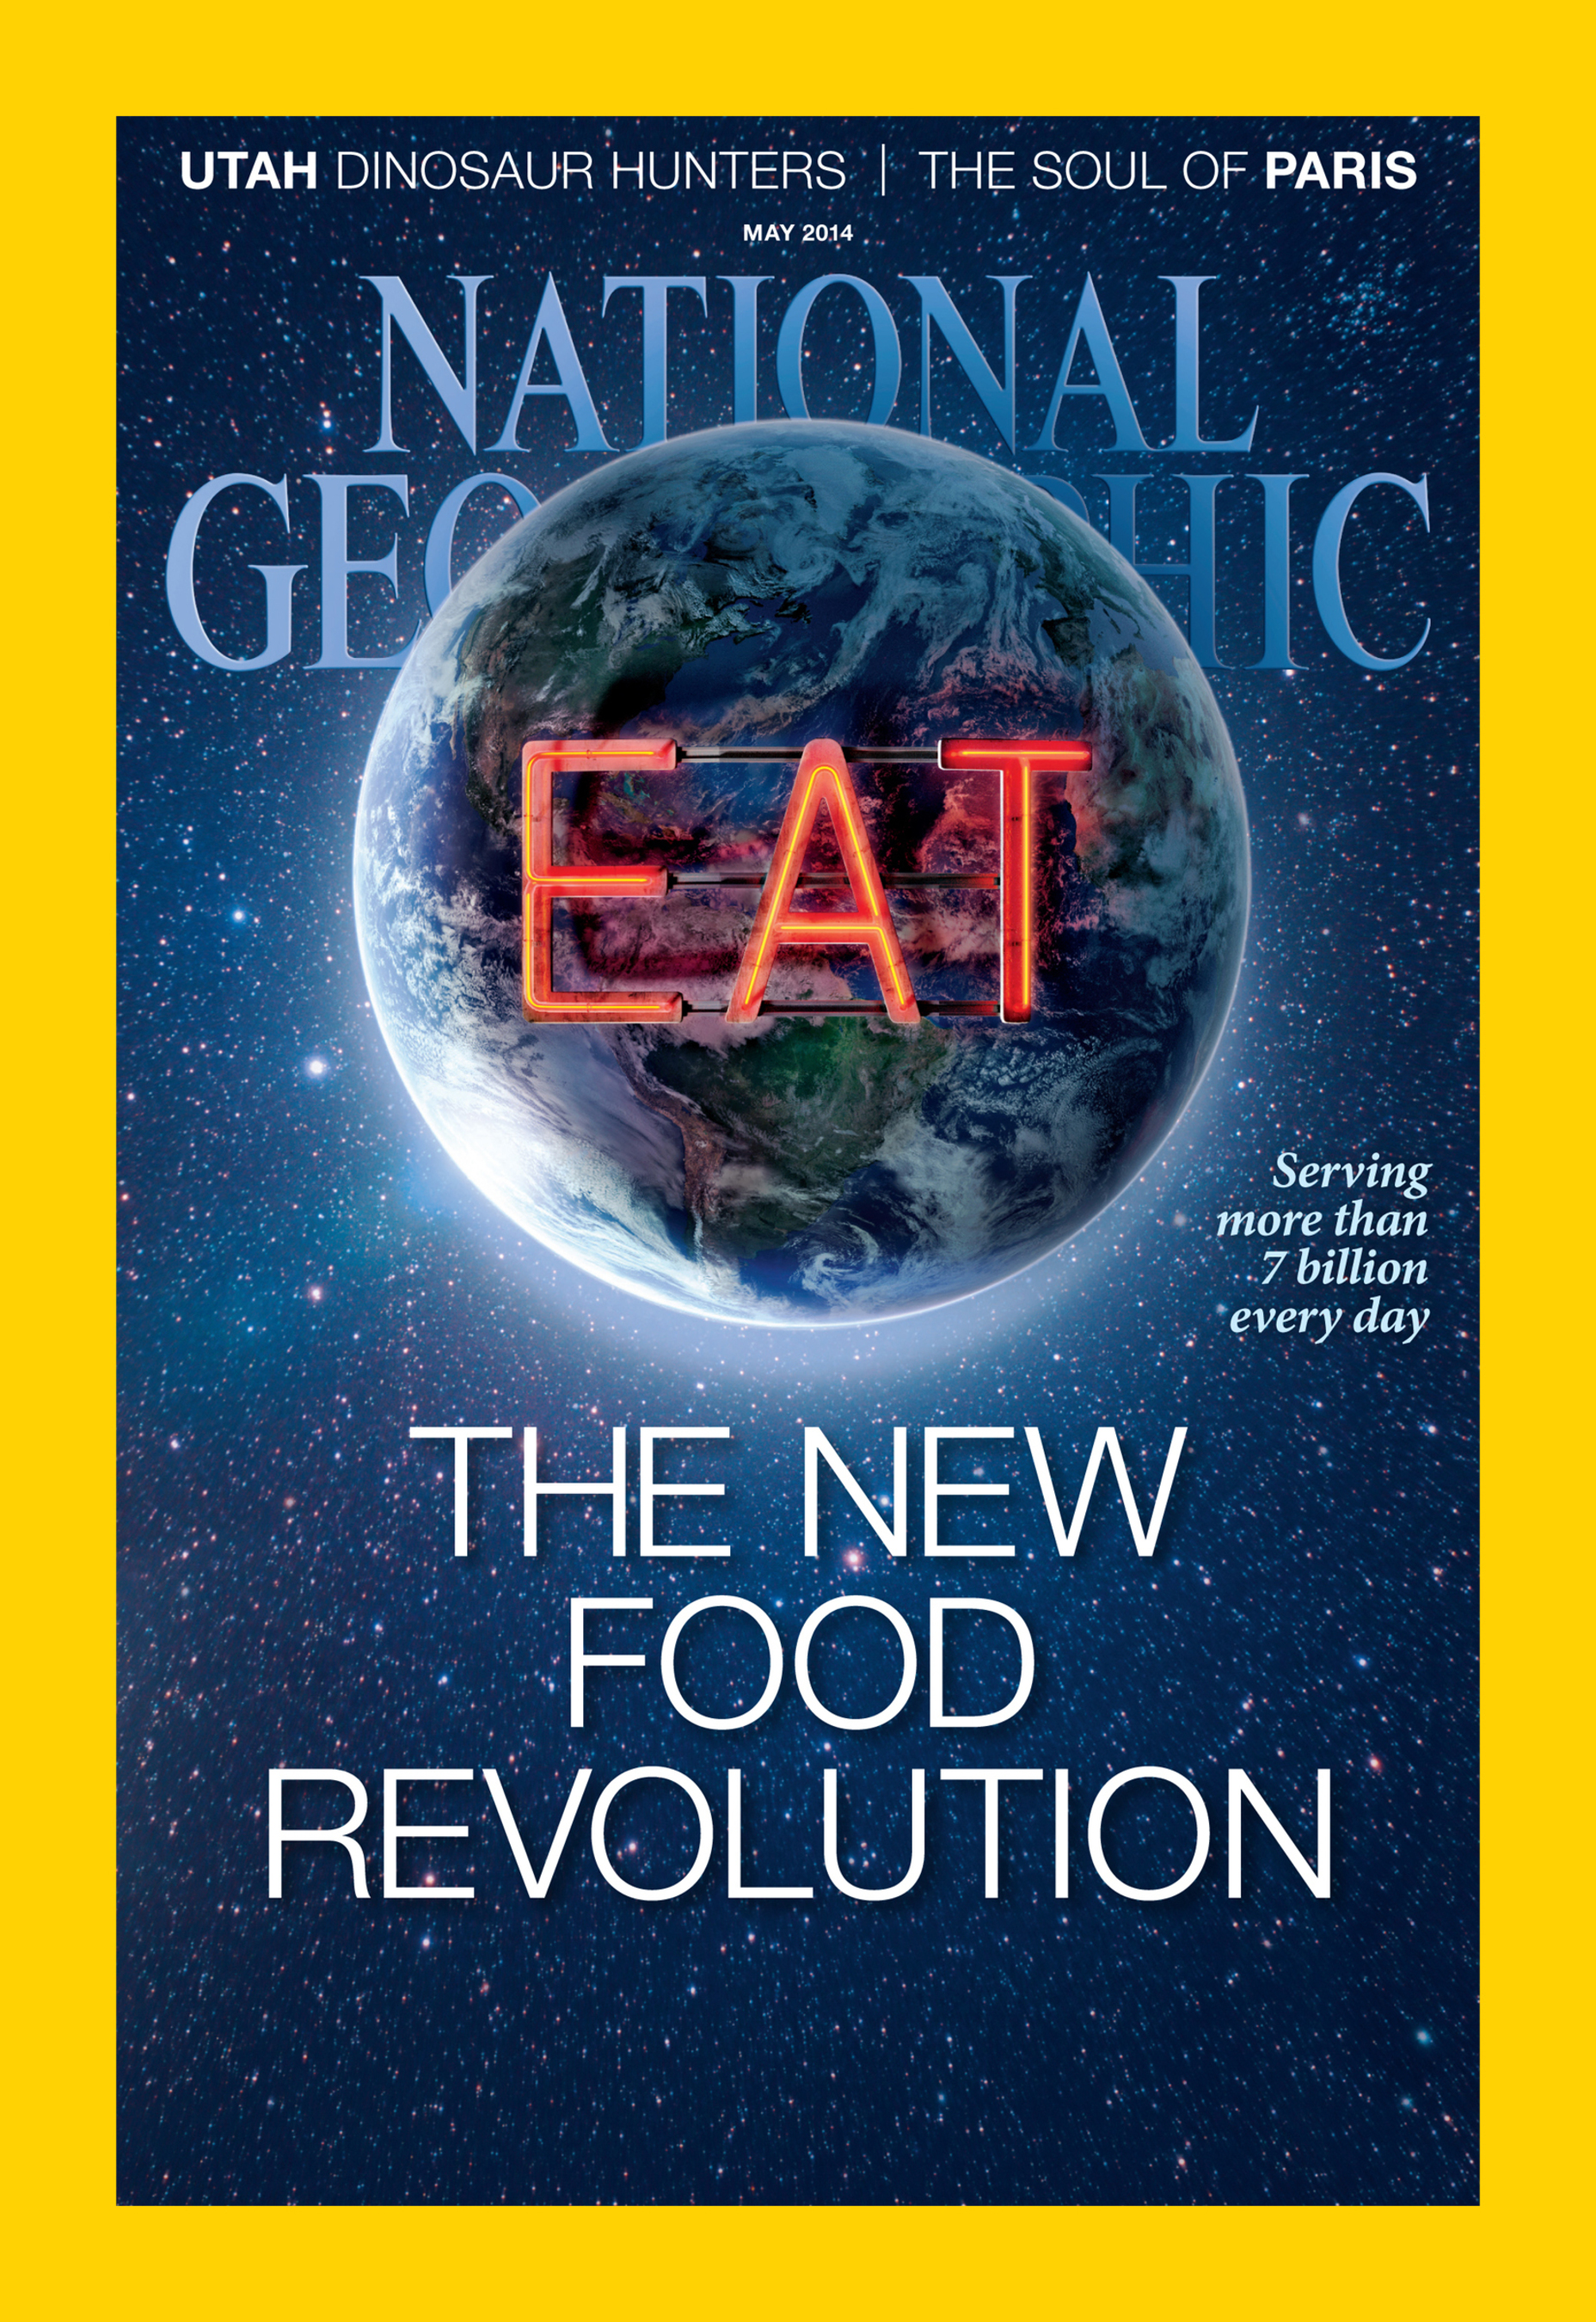 May 2014 issue of National Geographic Magazine, Credit: National Geographic. (PRNewsFoto/National Geographic)